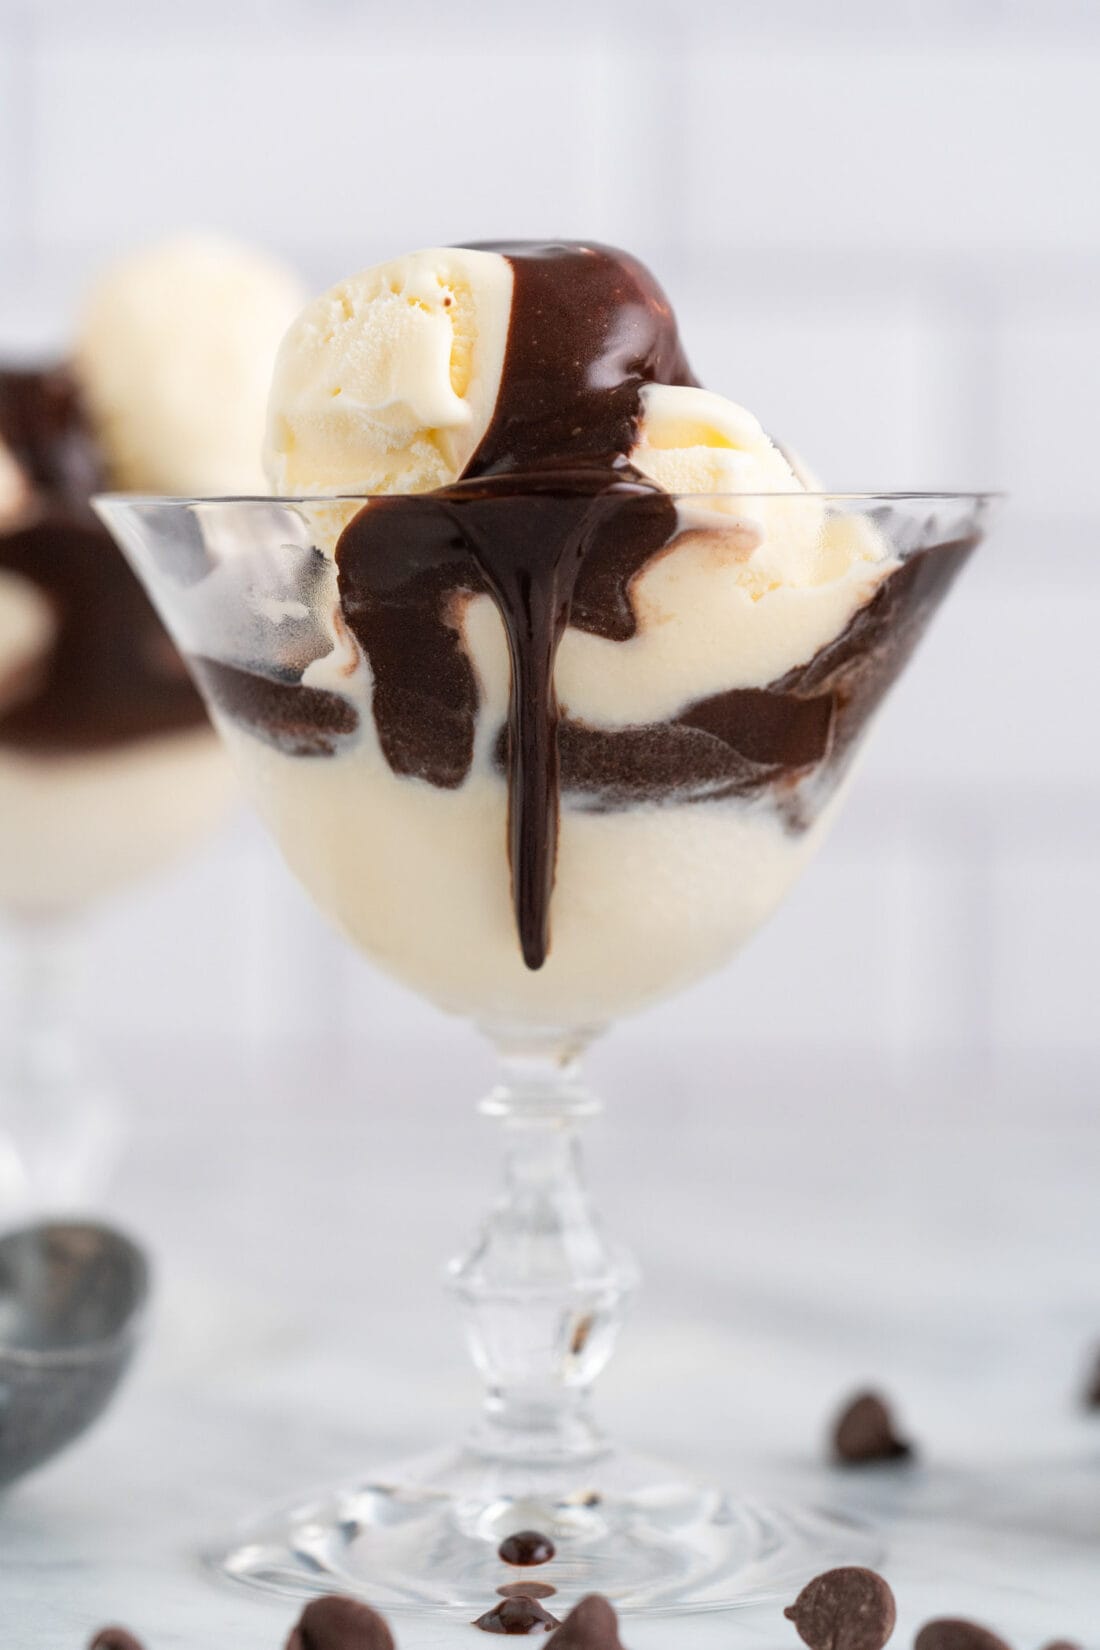 Ice cream in a sundae glass with Hot Fudge on top